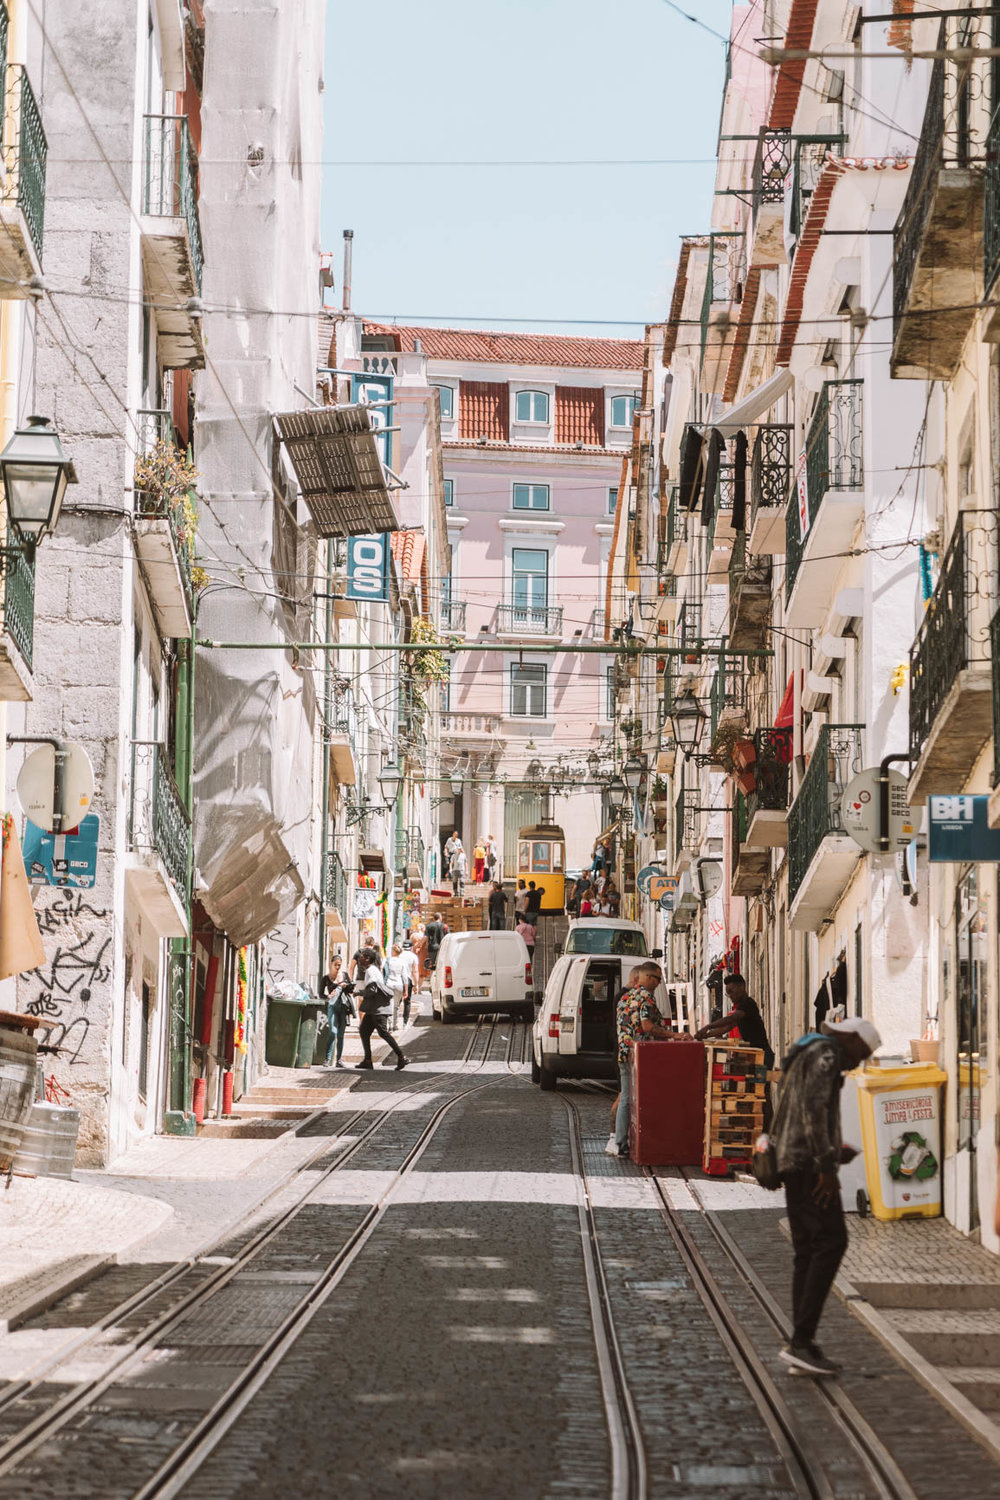 2 -3 Days Itinerary in Lisbon Portugal - Everything you need to know including where to eat, where to stay, and fun things to do in #Lisbon #Portugal